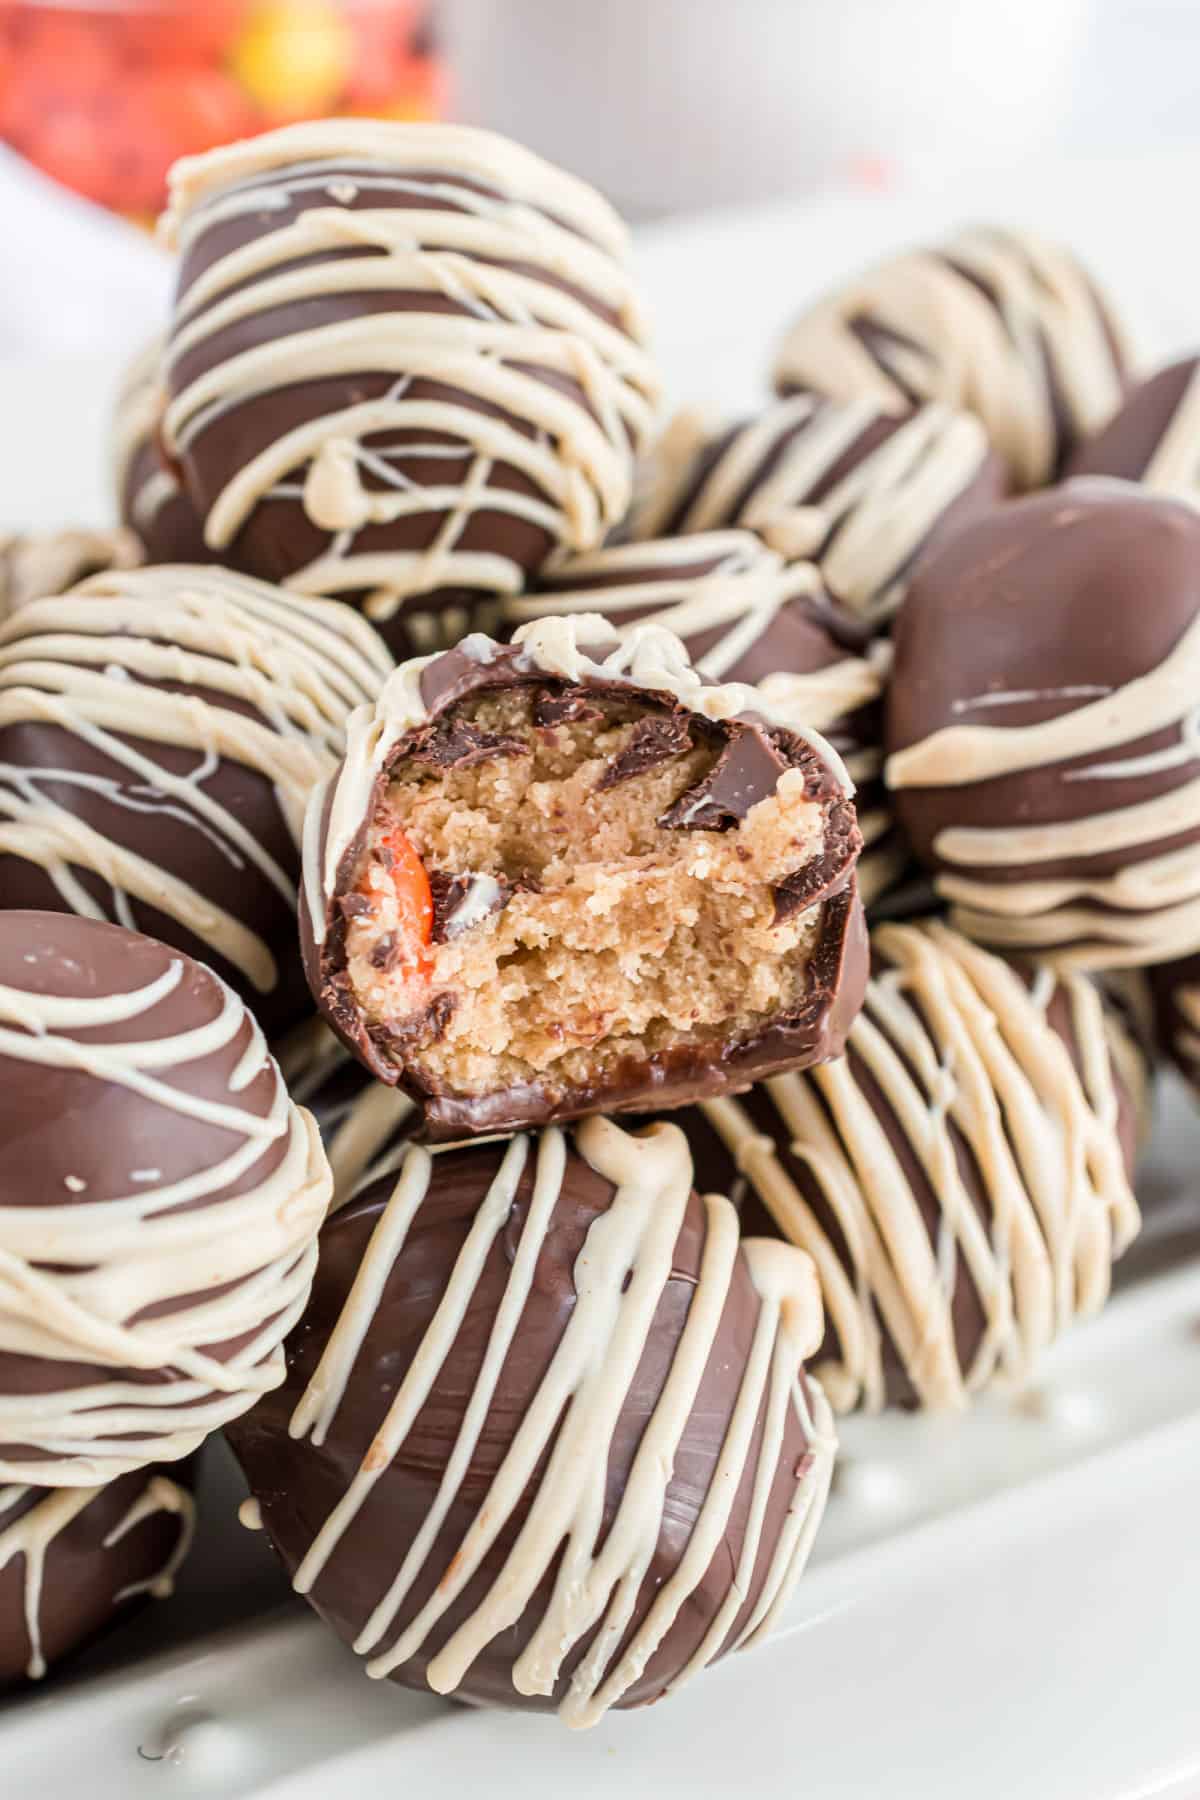 Stack of chocolate coated peanut butter cookie dough balls.